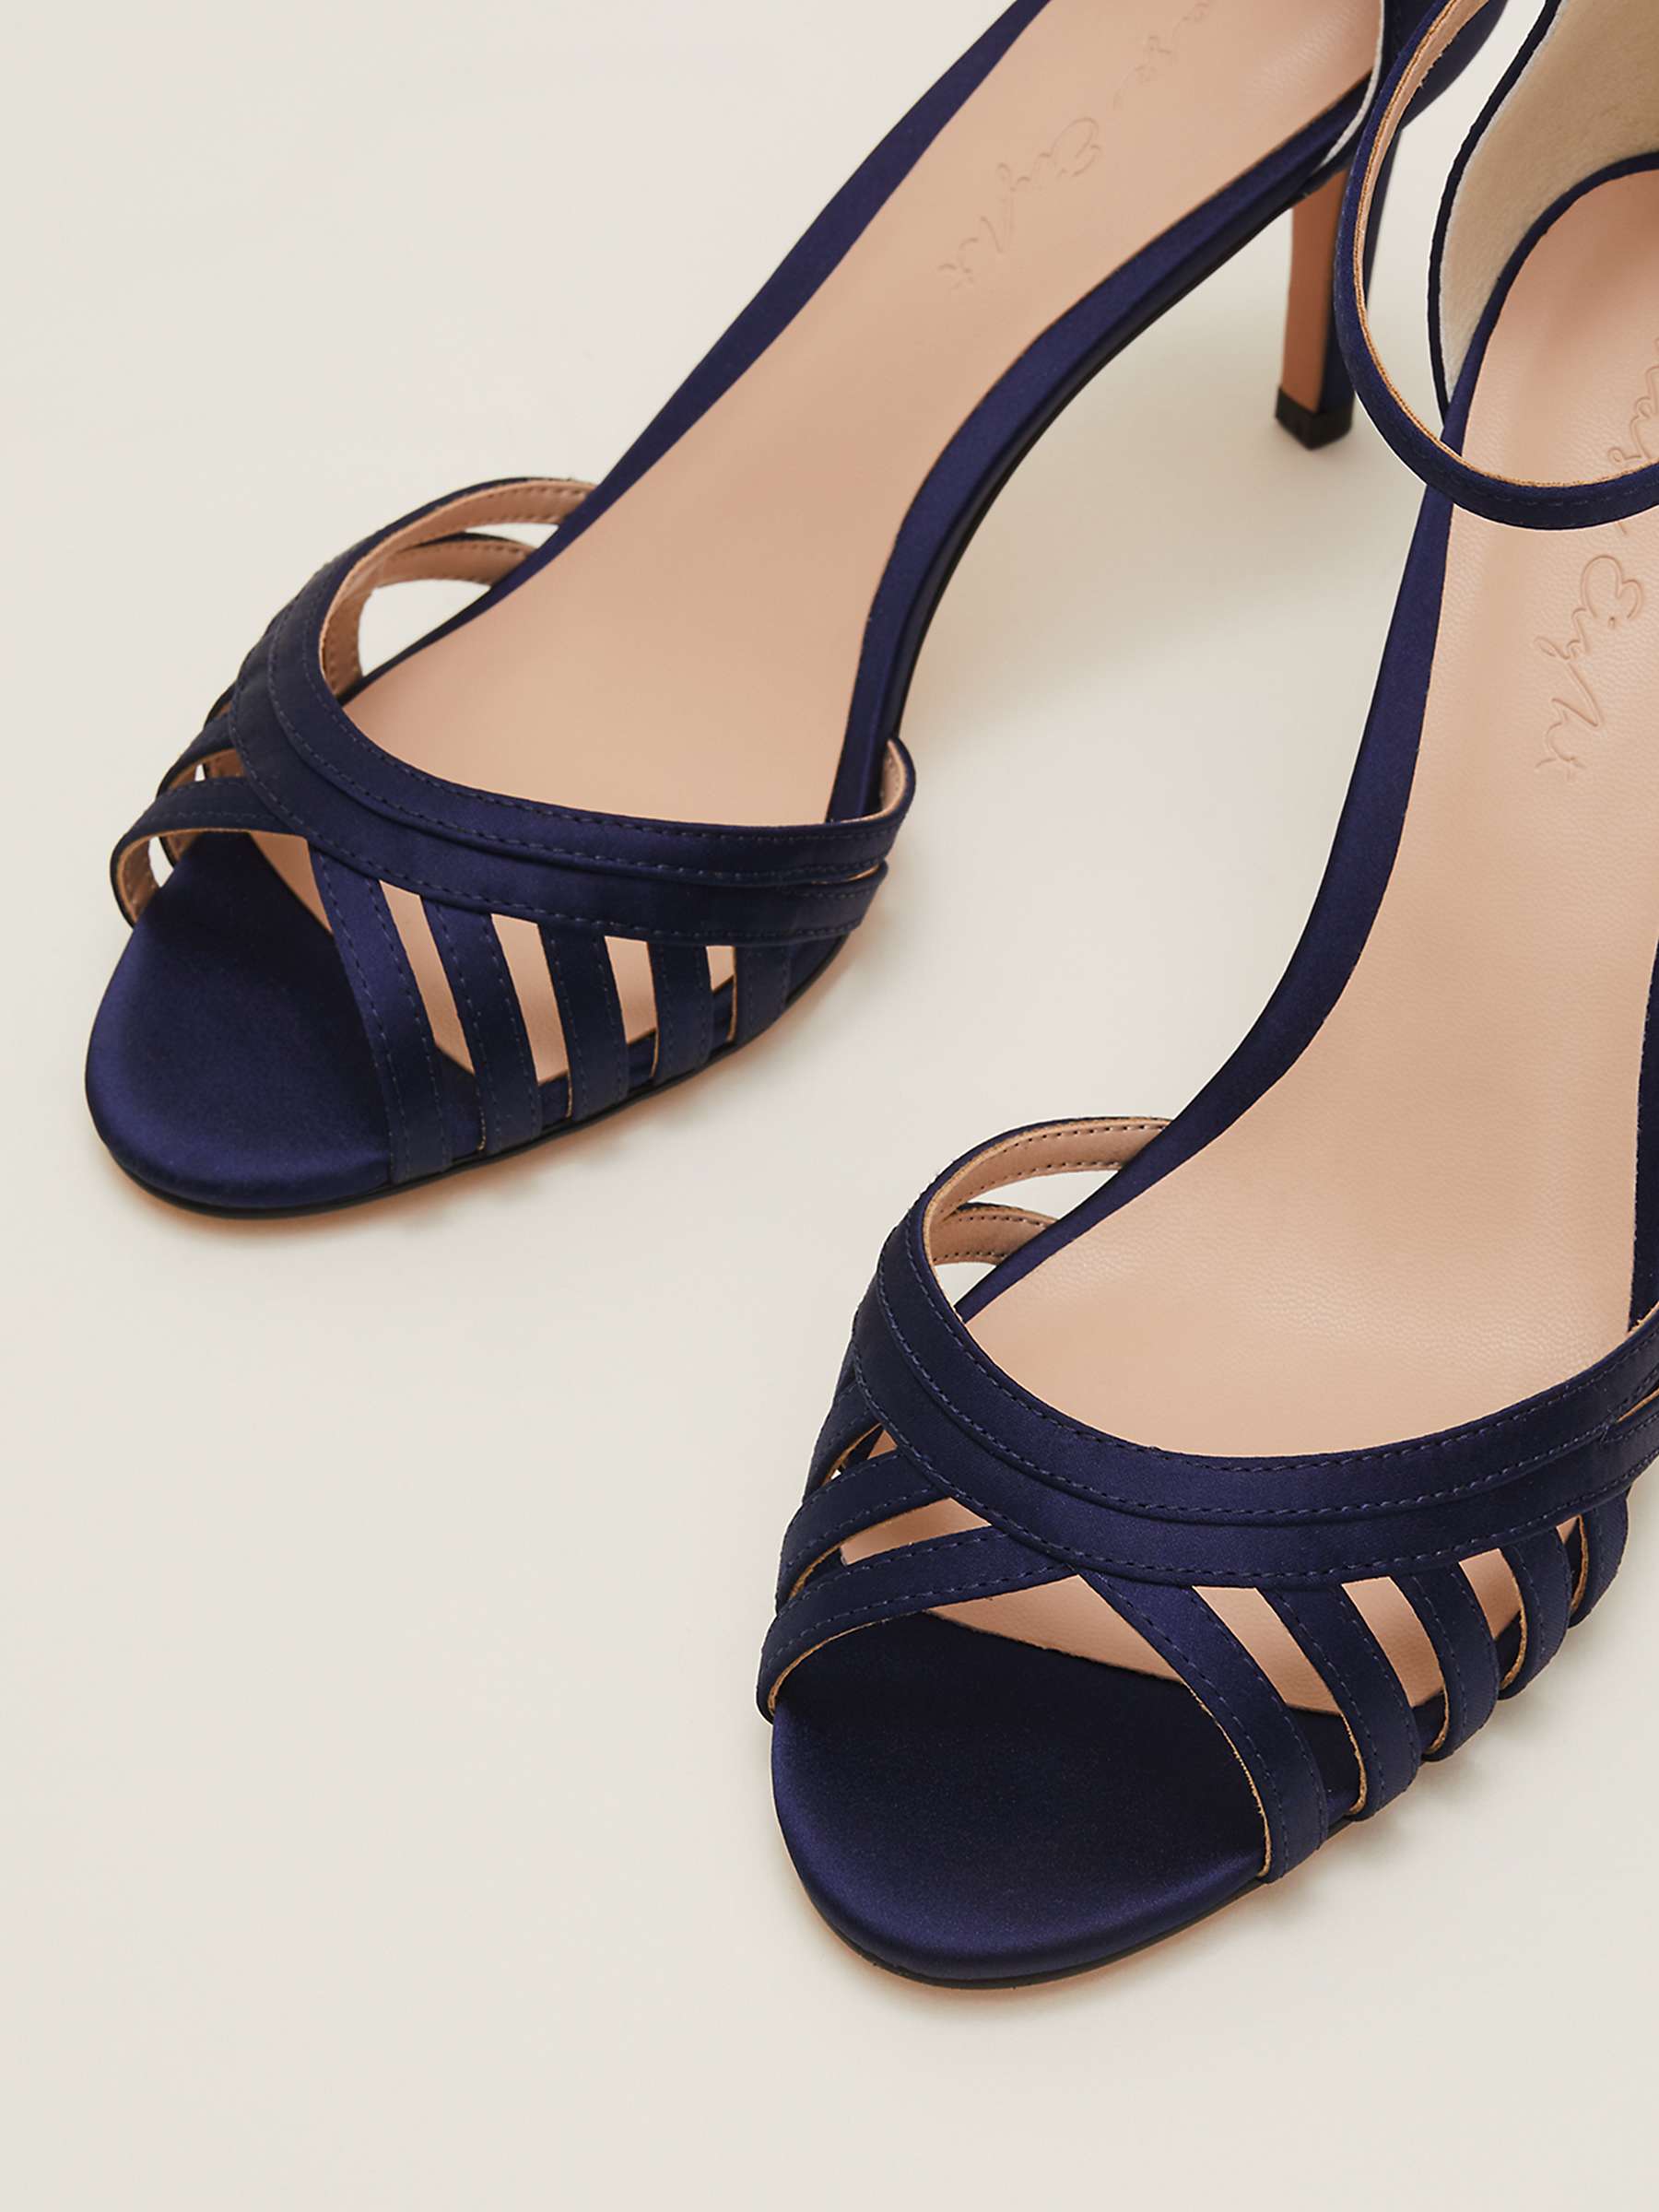 Buy Phase Eight Satin Strappy Heeled Sandals, French Navy Online at johnlewis.com